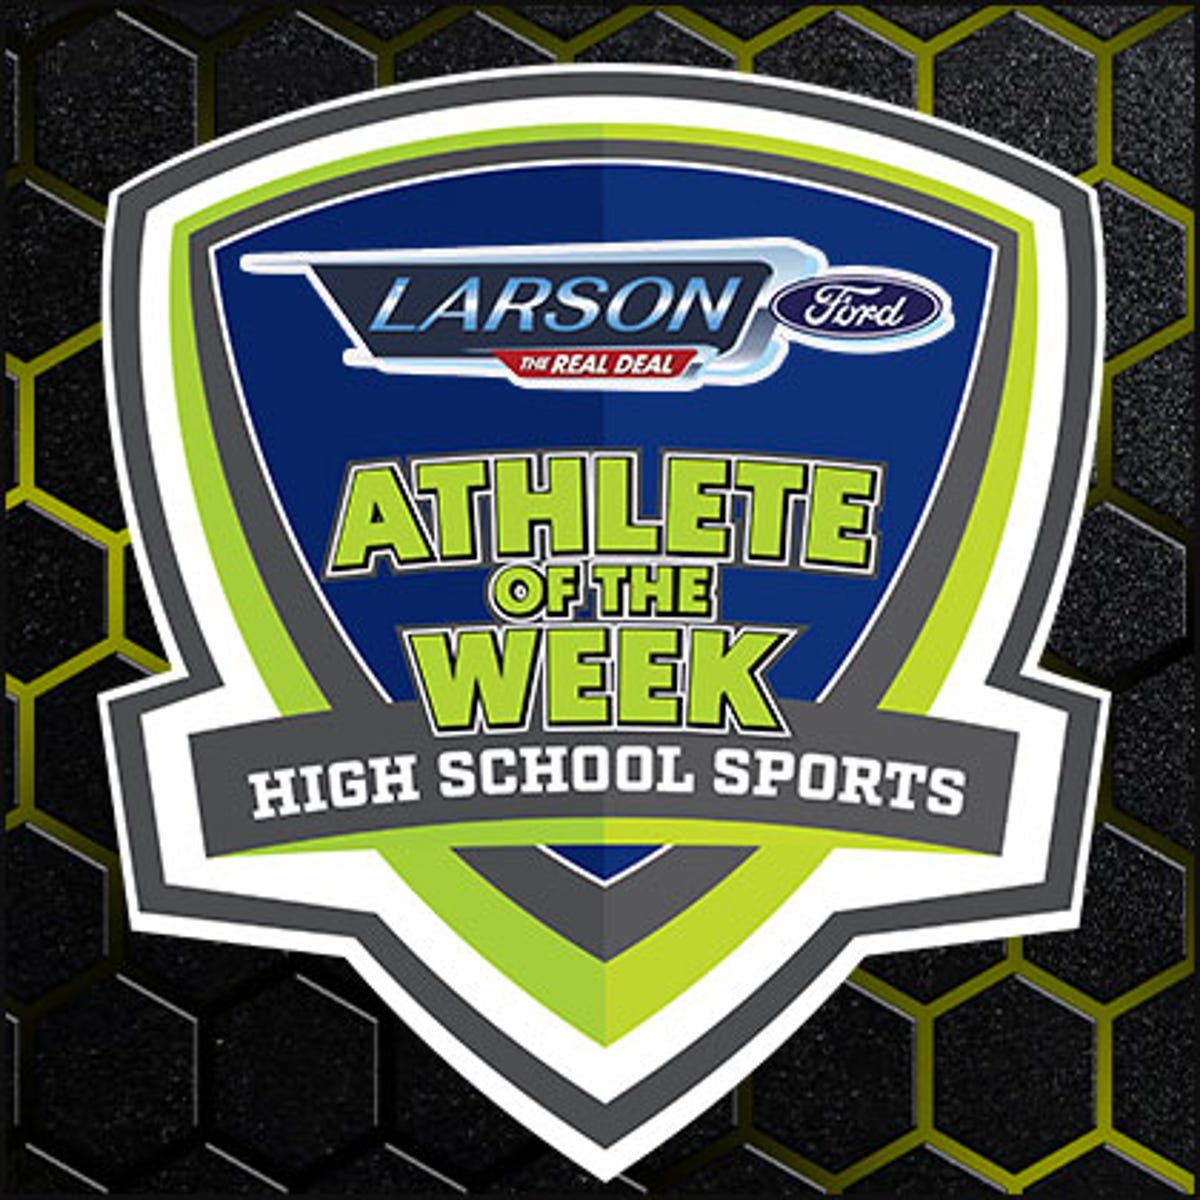 Meet the Spring Star Nominees: APP Athlete of the Week No. 5 | Larson Ford